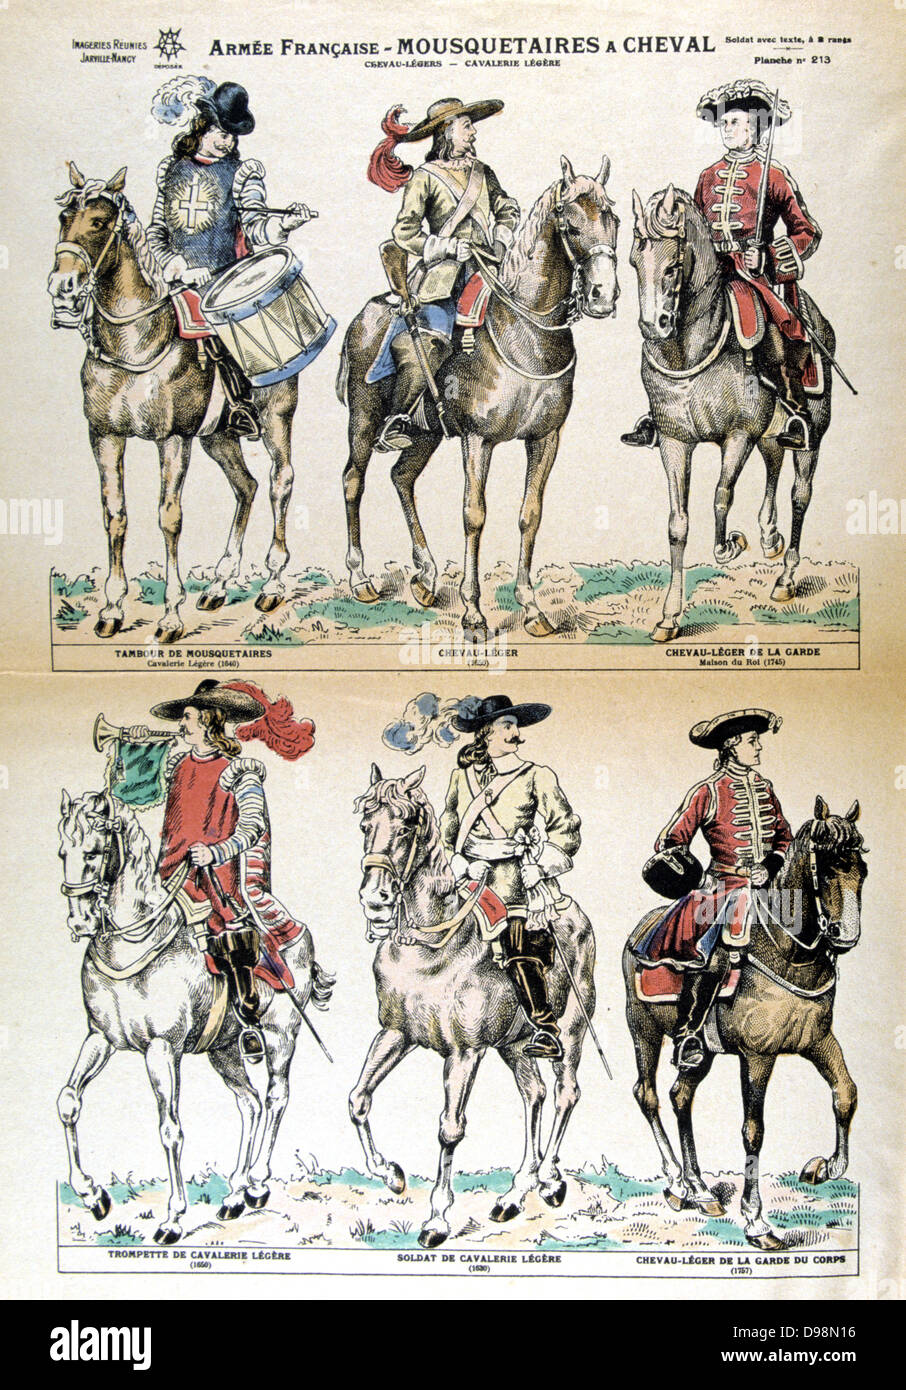 Mounted Musketeers of the French Army in the 17th and eighteenth centuries. Mid-19th century popular print. Stock Photo